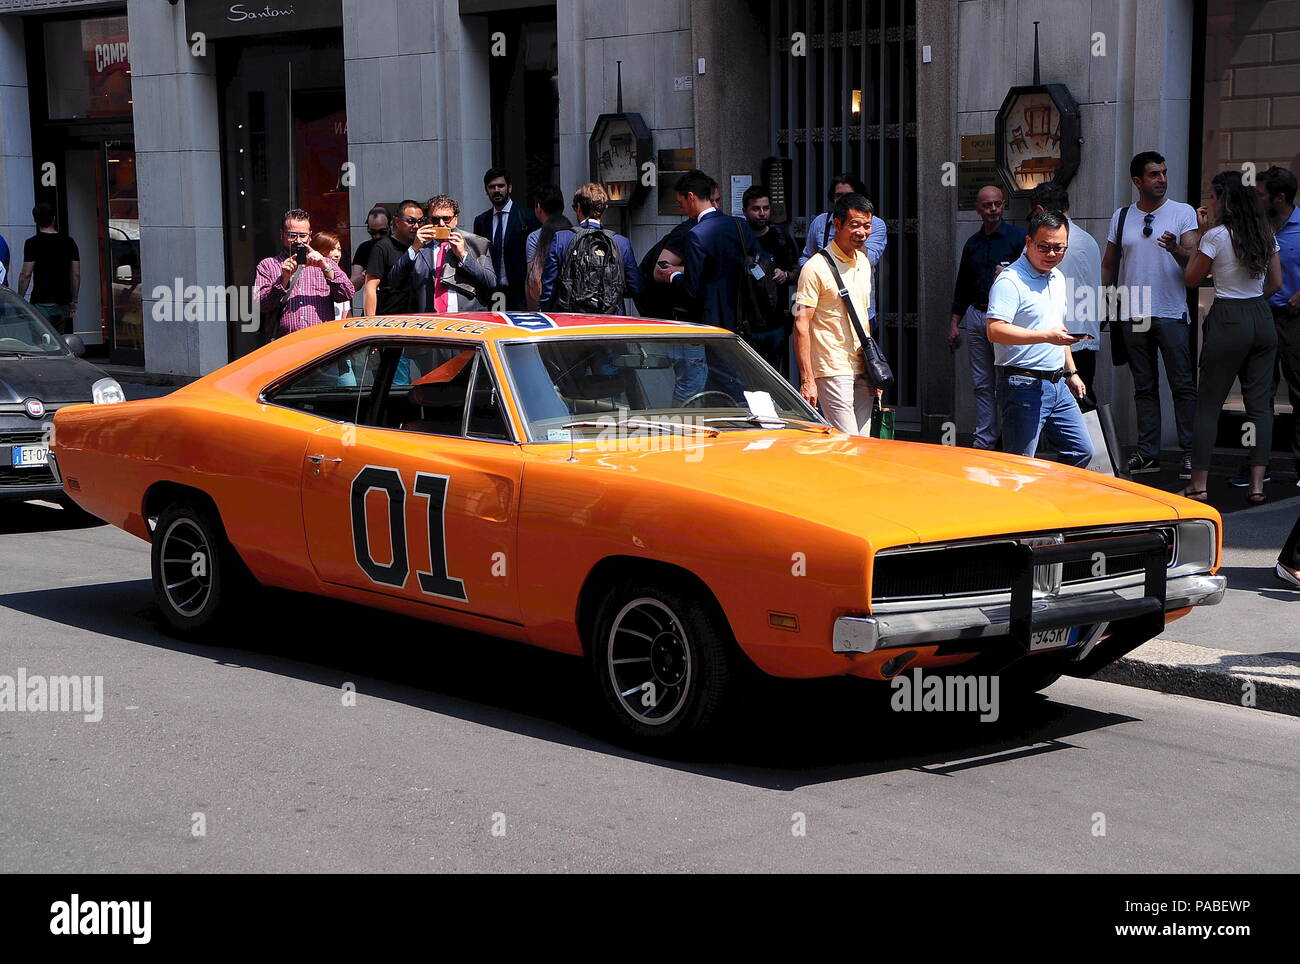 A replica of the famous 'General Lee' 1969 Dodge Charger car driven in the television series The Dukes of Hazzard received a parking ticket whilst being parked in Milan, Italy. Passersby took pictures with the car as it was parked on Via Monte Napoleone, an upscale shopping street in the city.  Featuring: General Lee Where: Milan, Italy When: 20 Jun 2018 Credit: IPA/WENN.com  **Only available for publication in UK, USA, Germany, Austria, Switzerland** Stock Photo